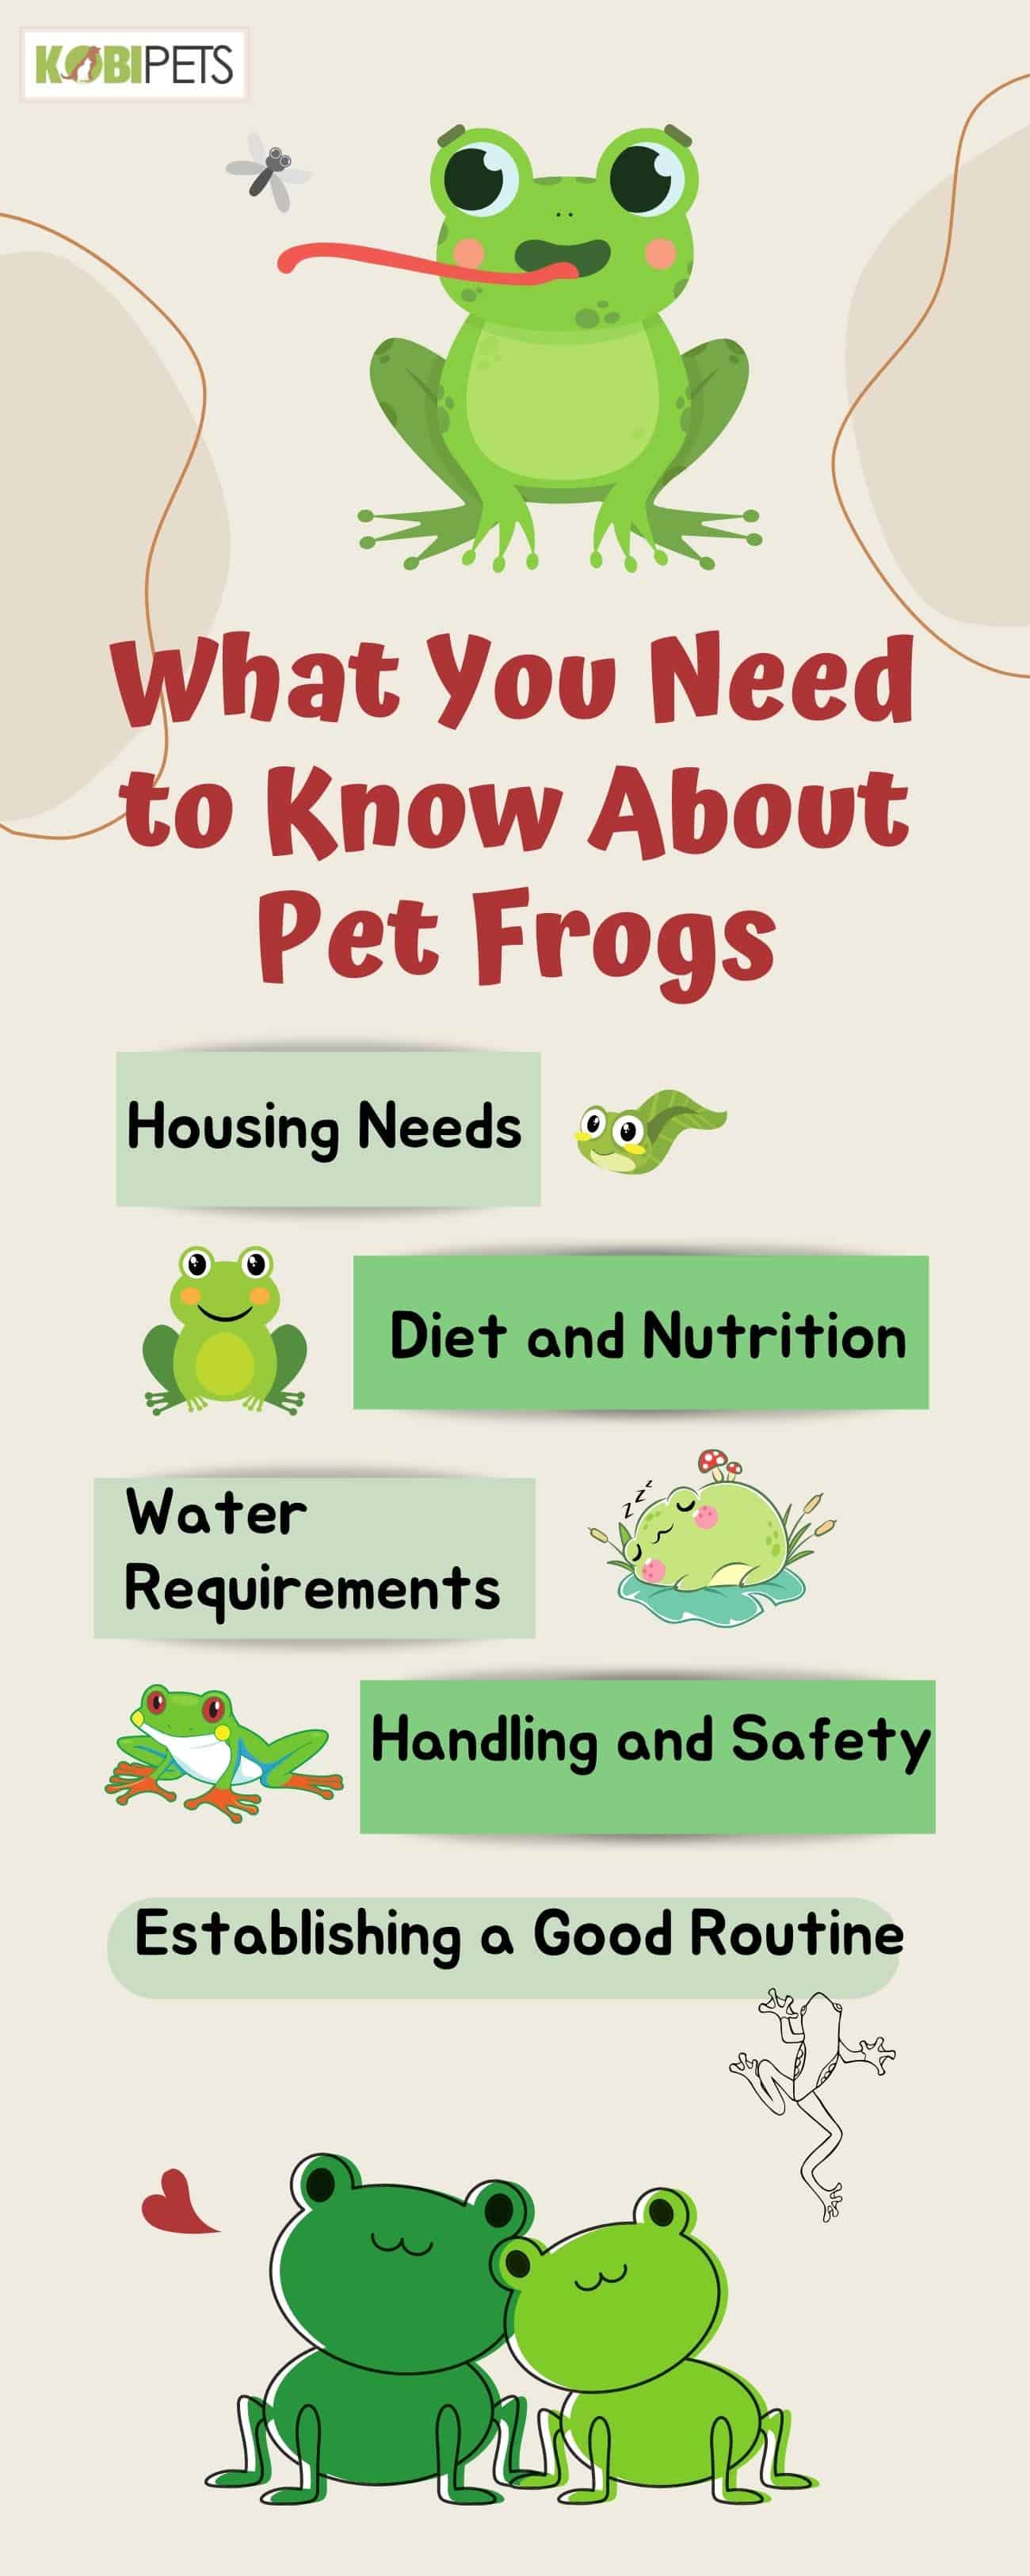 What You Need to Know About Pet Frogs